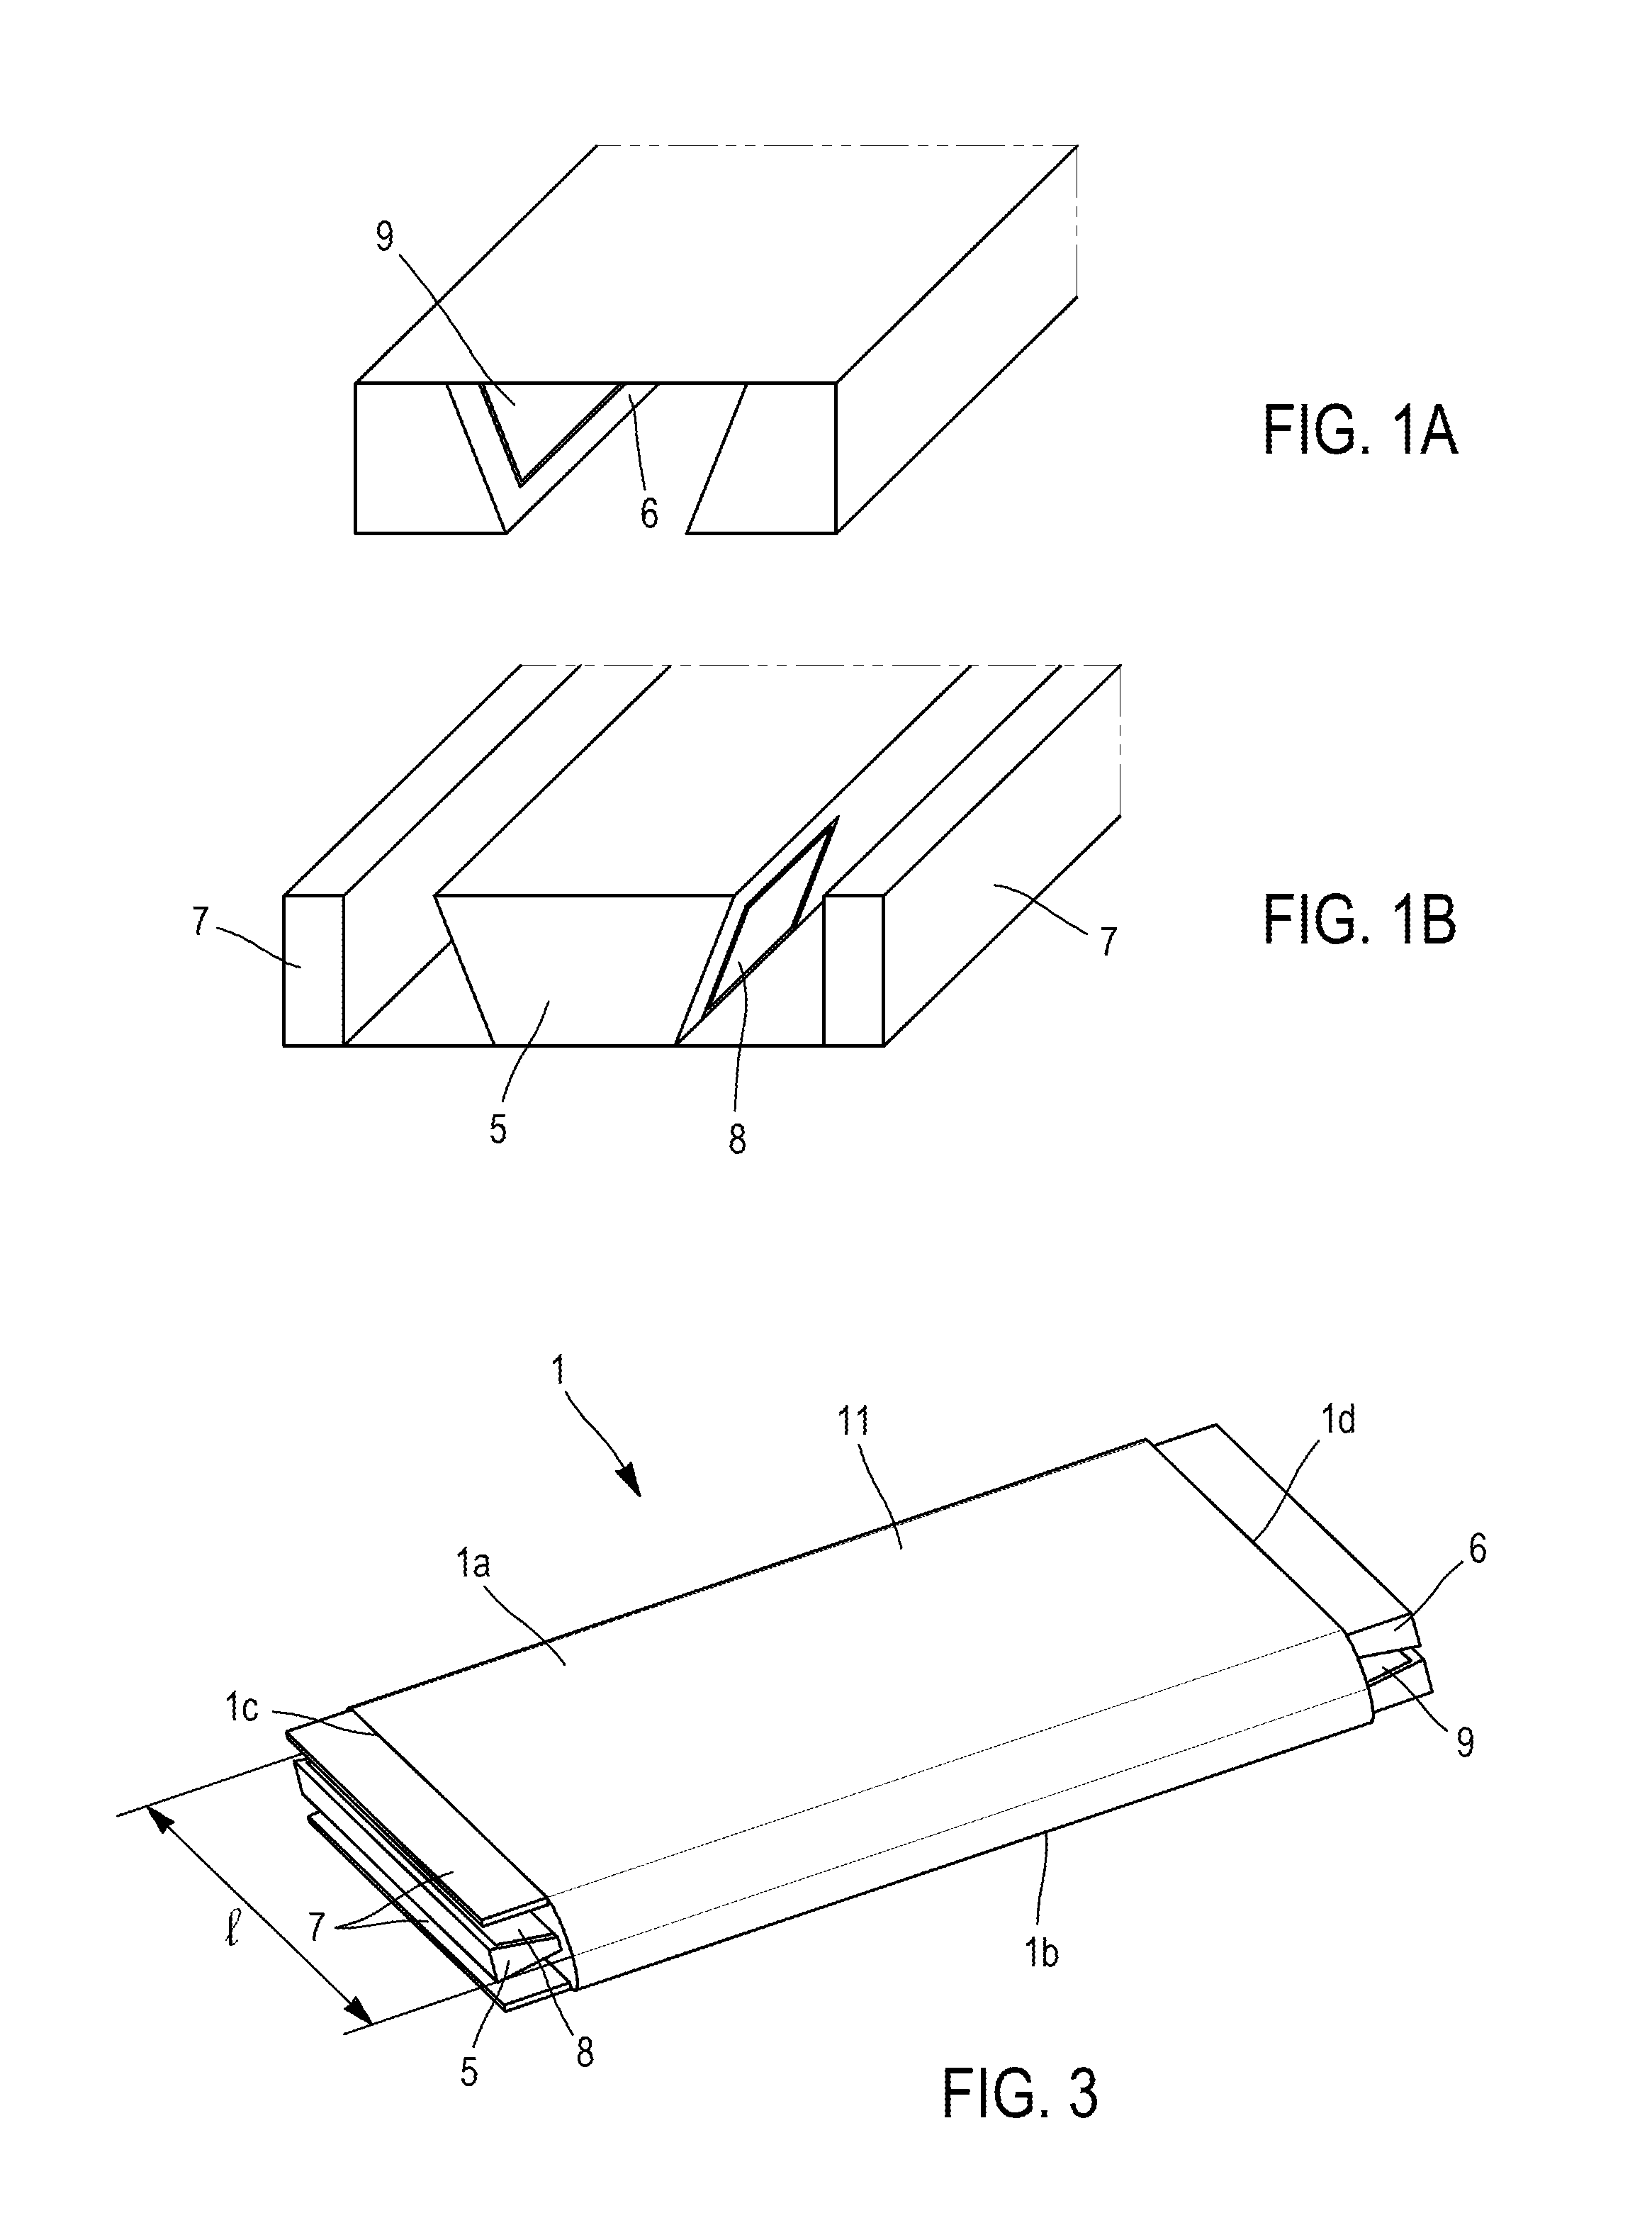 Cell for storing power, comprising at least one male element and one female element equipped with electrical connection interfaces